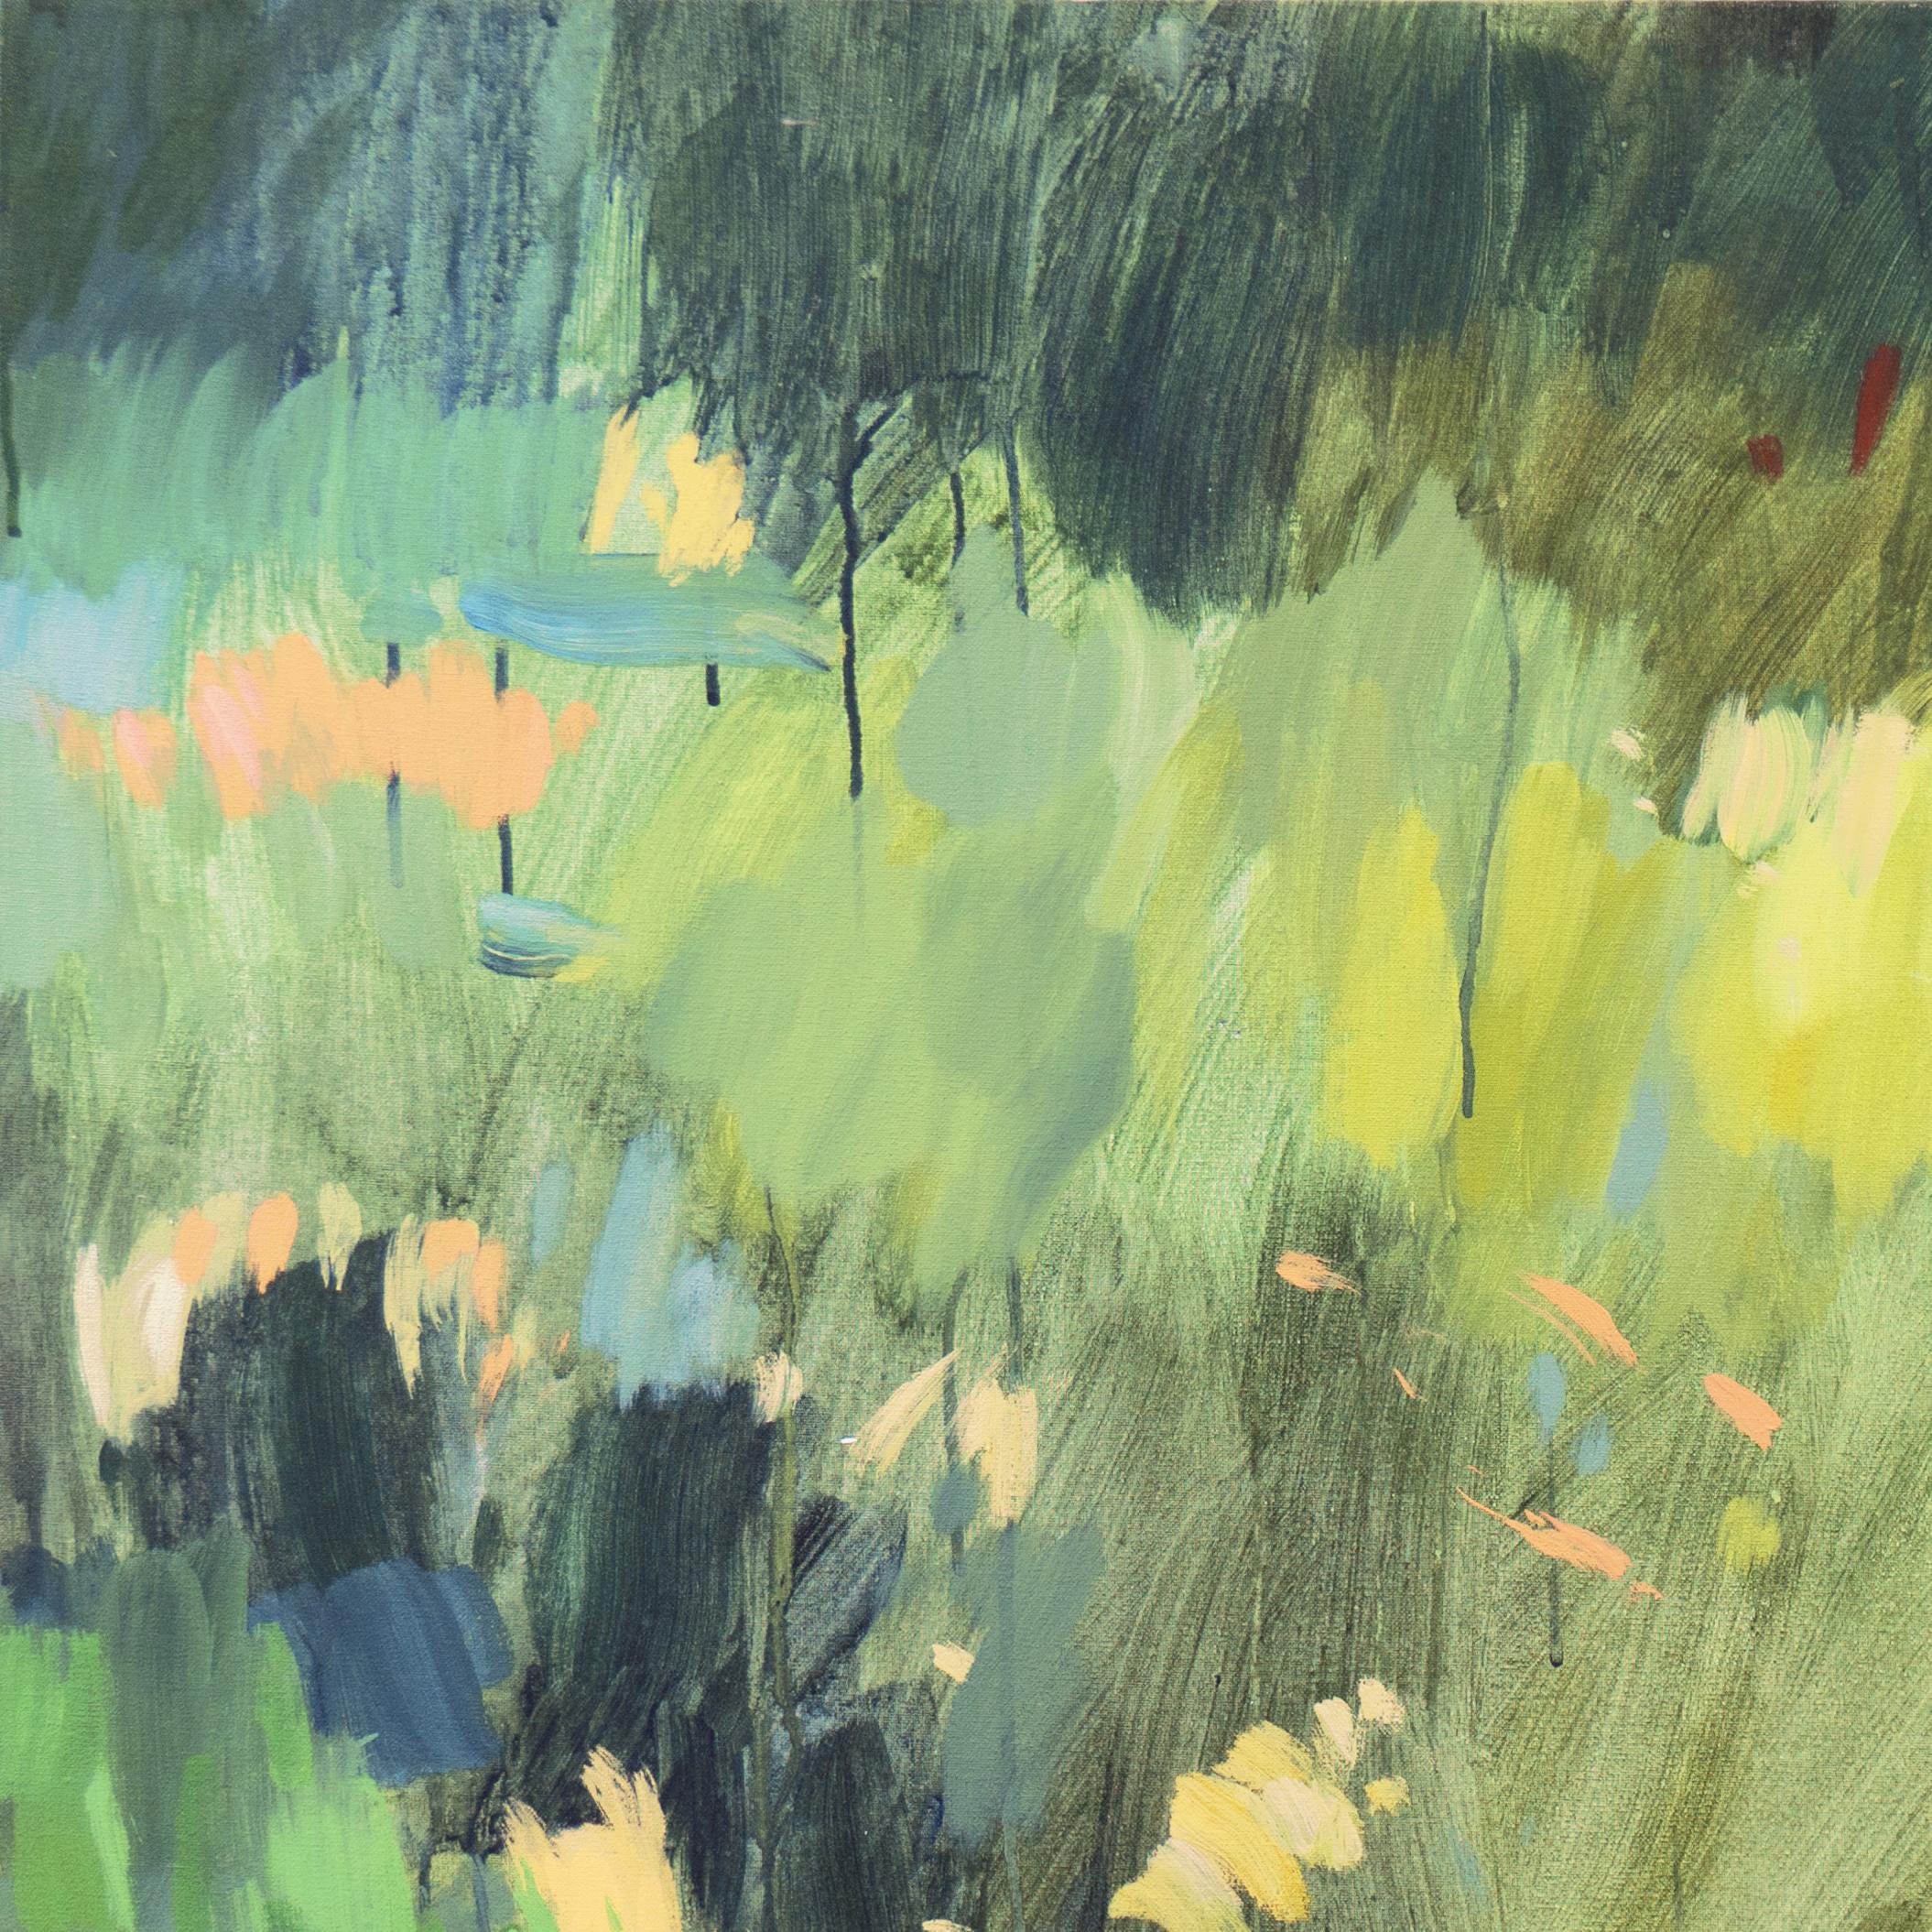 'Come May', Large Semi-Abstract Springtime Landscape, English artist - Abstract Impressionist Painting by Jeremy Thornton